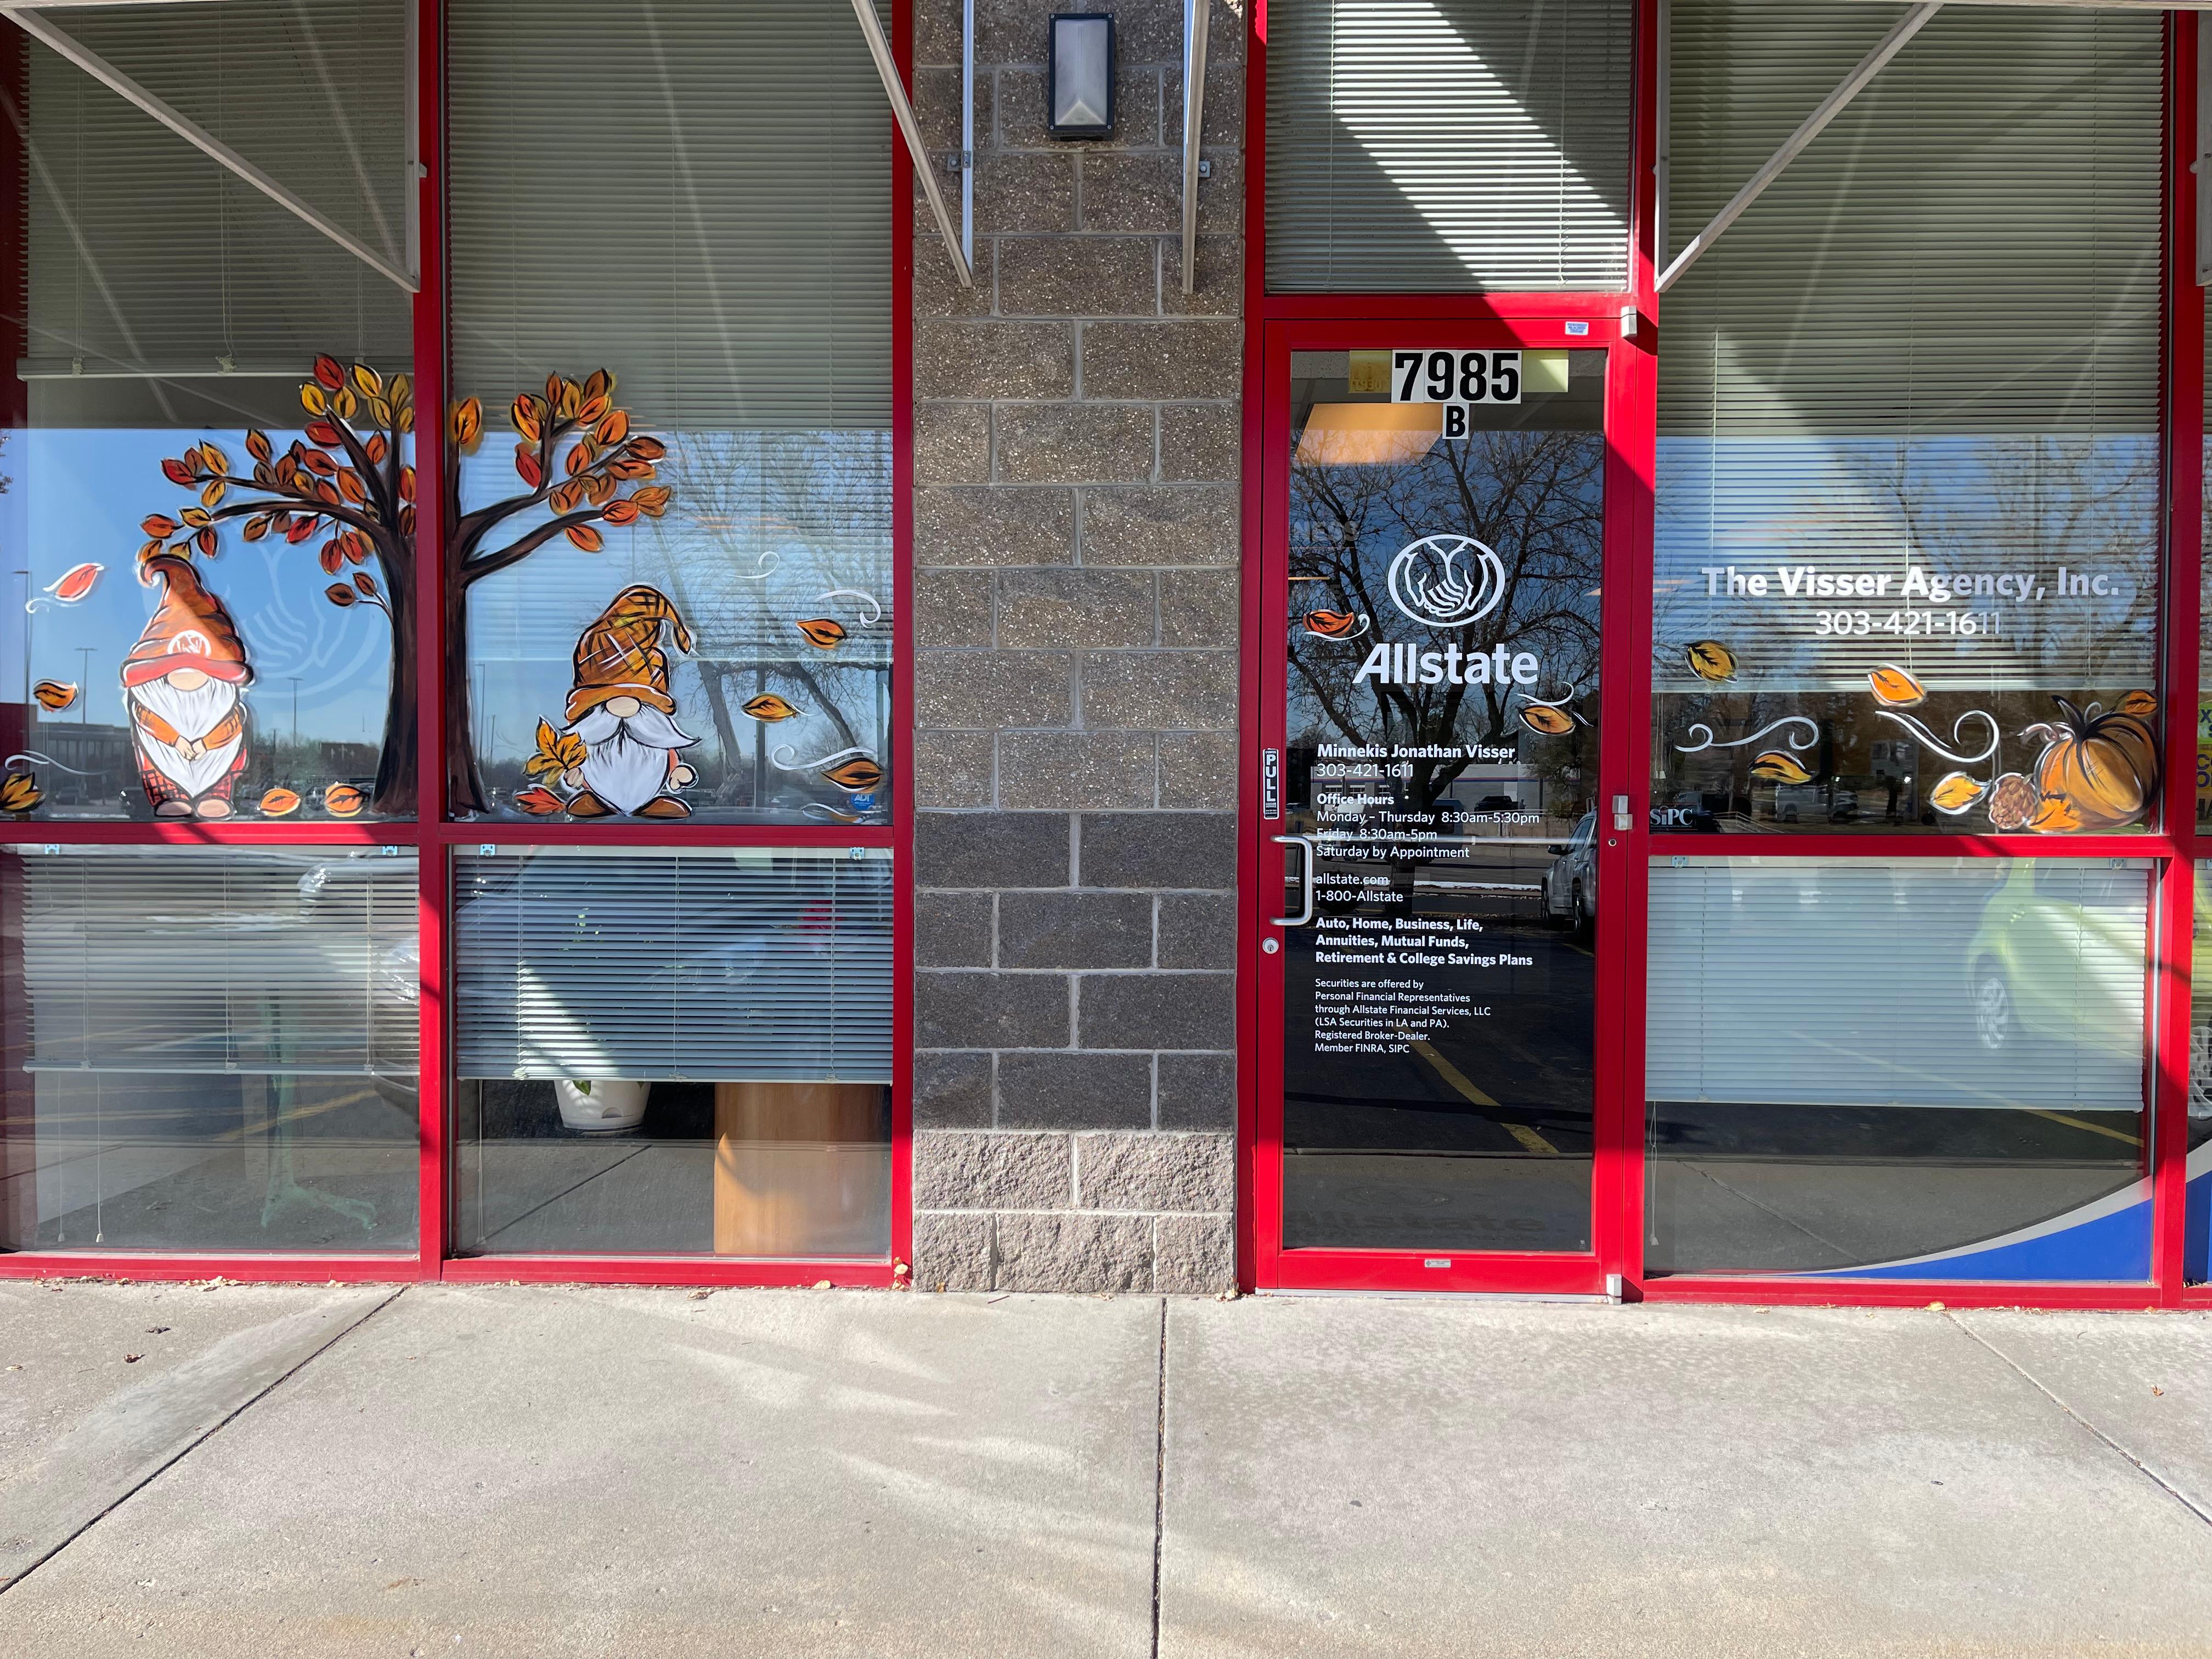 Celebrating the Fall Season with Window Art from a great Local Artist - Art by Gina T.